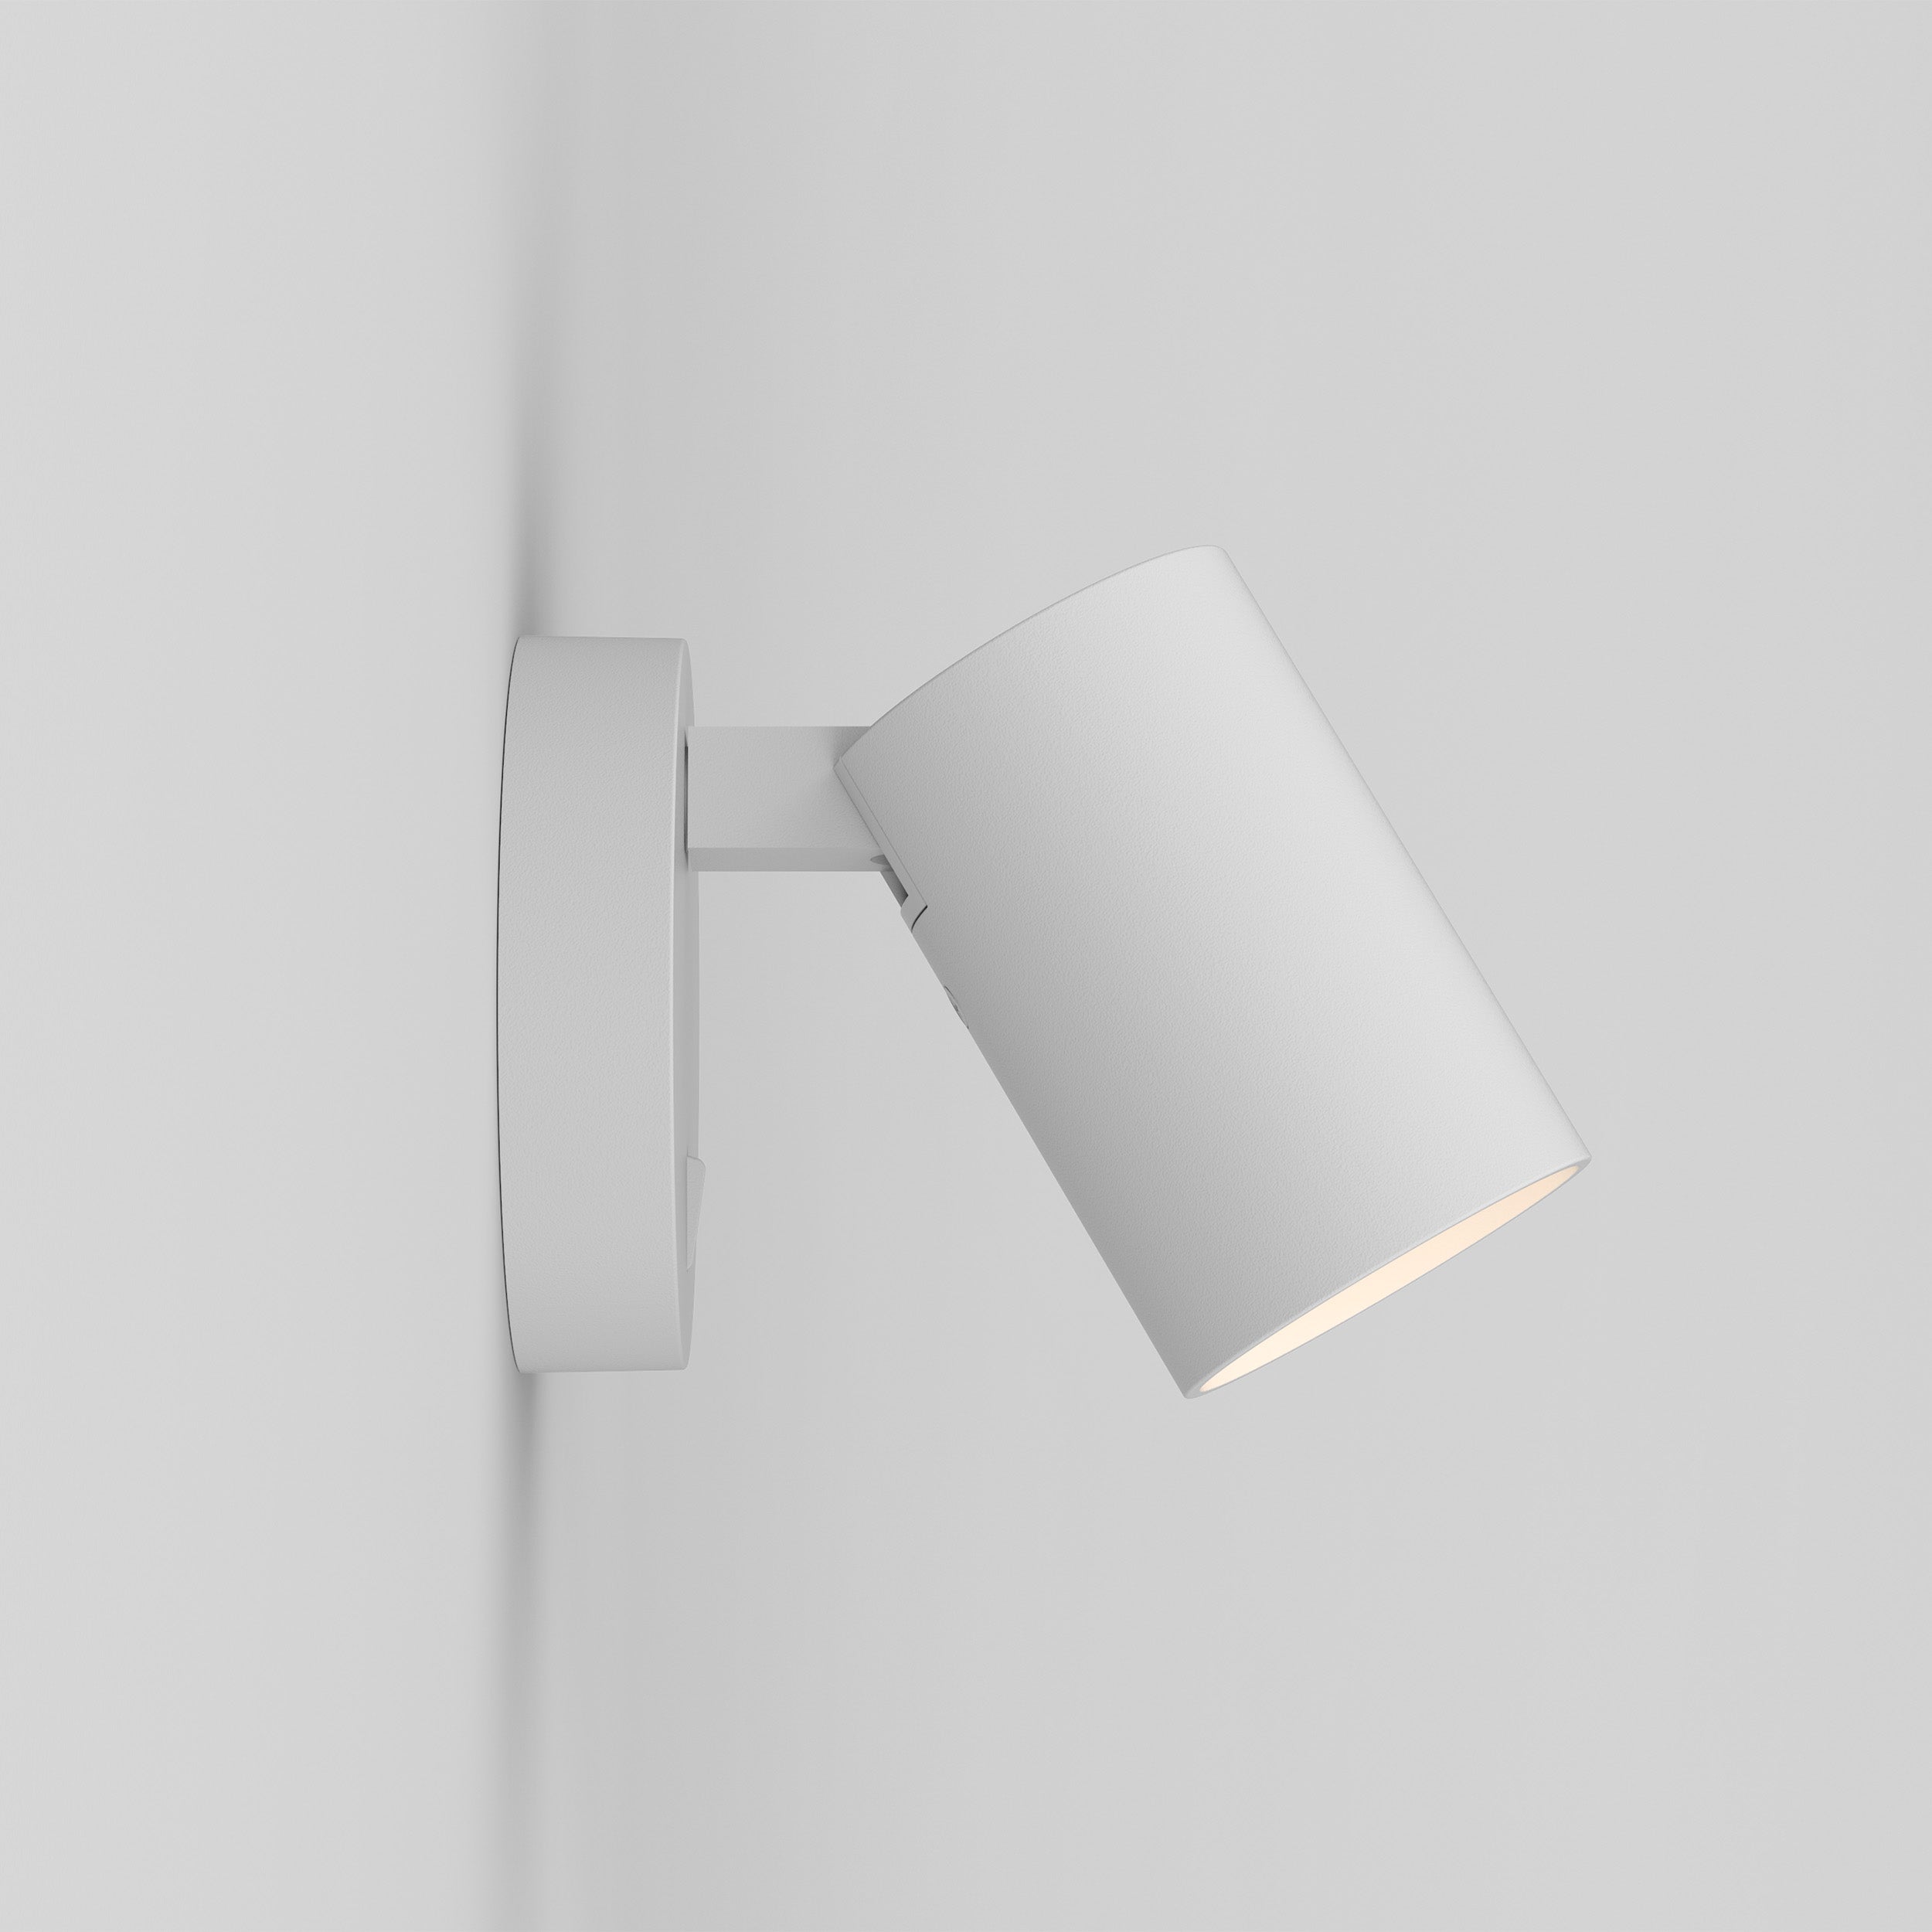 Astro Lighting Ascoli Single Switched Wall Light Fixtures Astro Lighting   